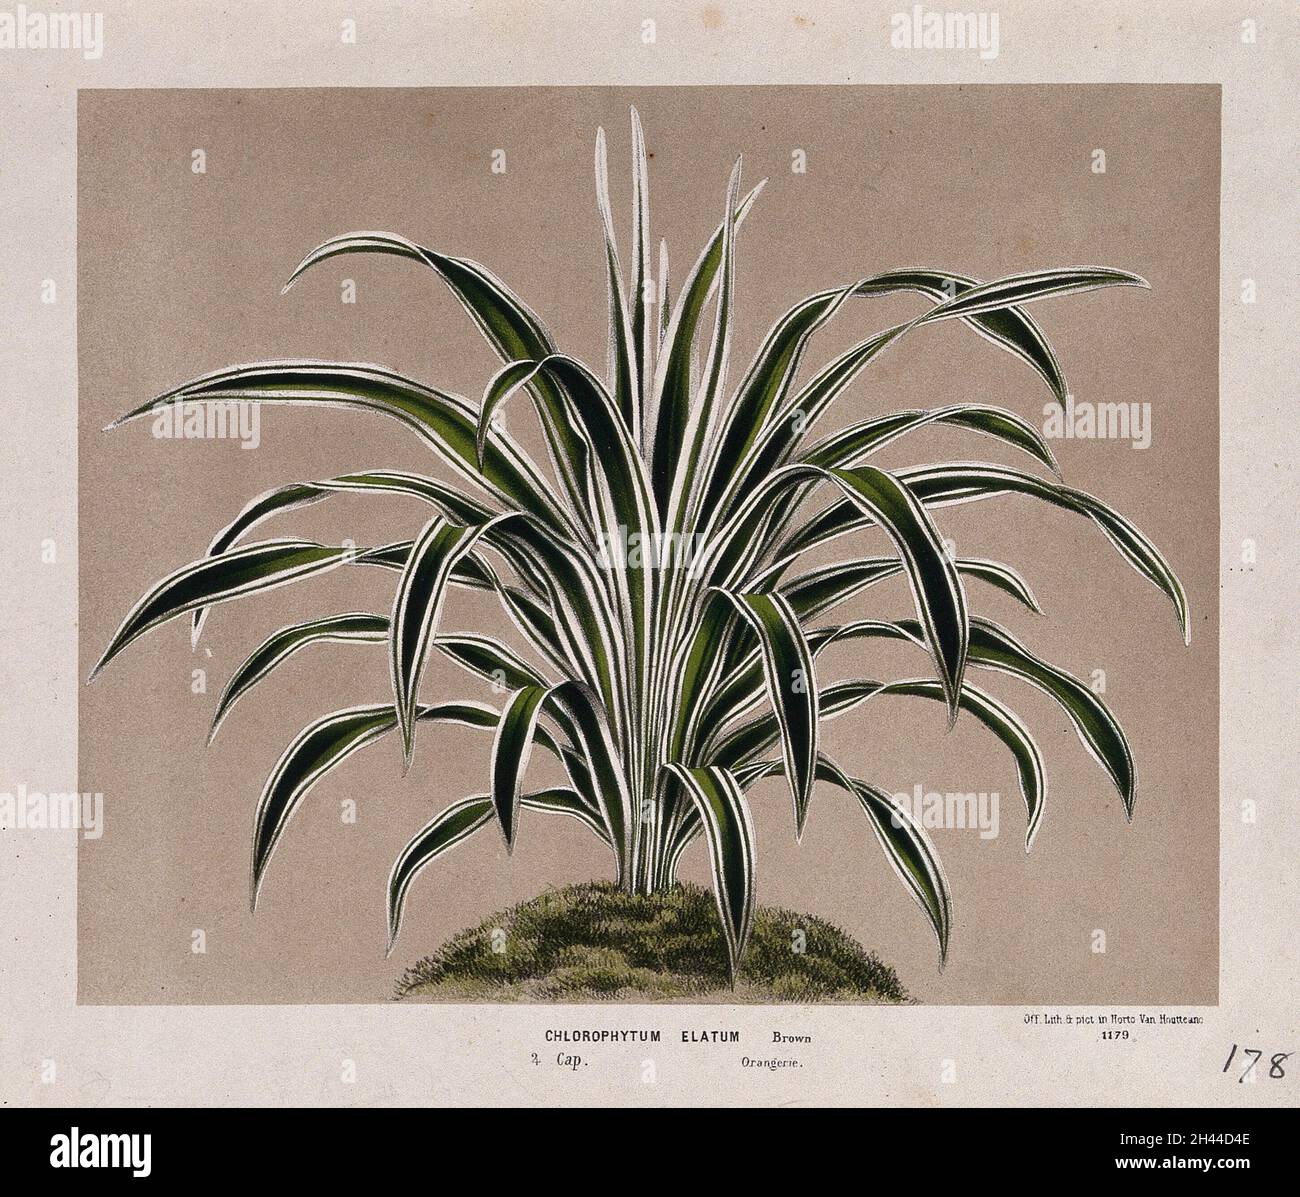 A leafy plant (Chlorophytum elatum), related to the spider plant. Chromolithograph by L. van Houtte, c. 1875. Stock Photo